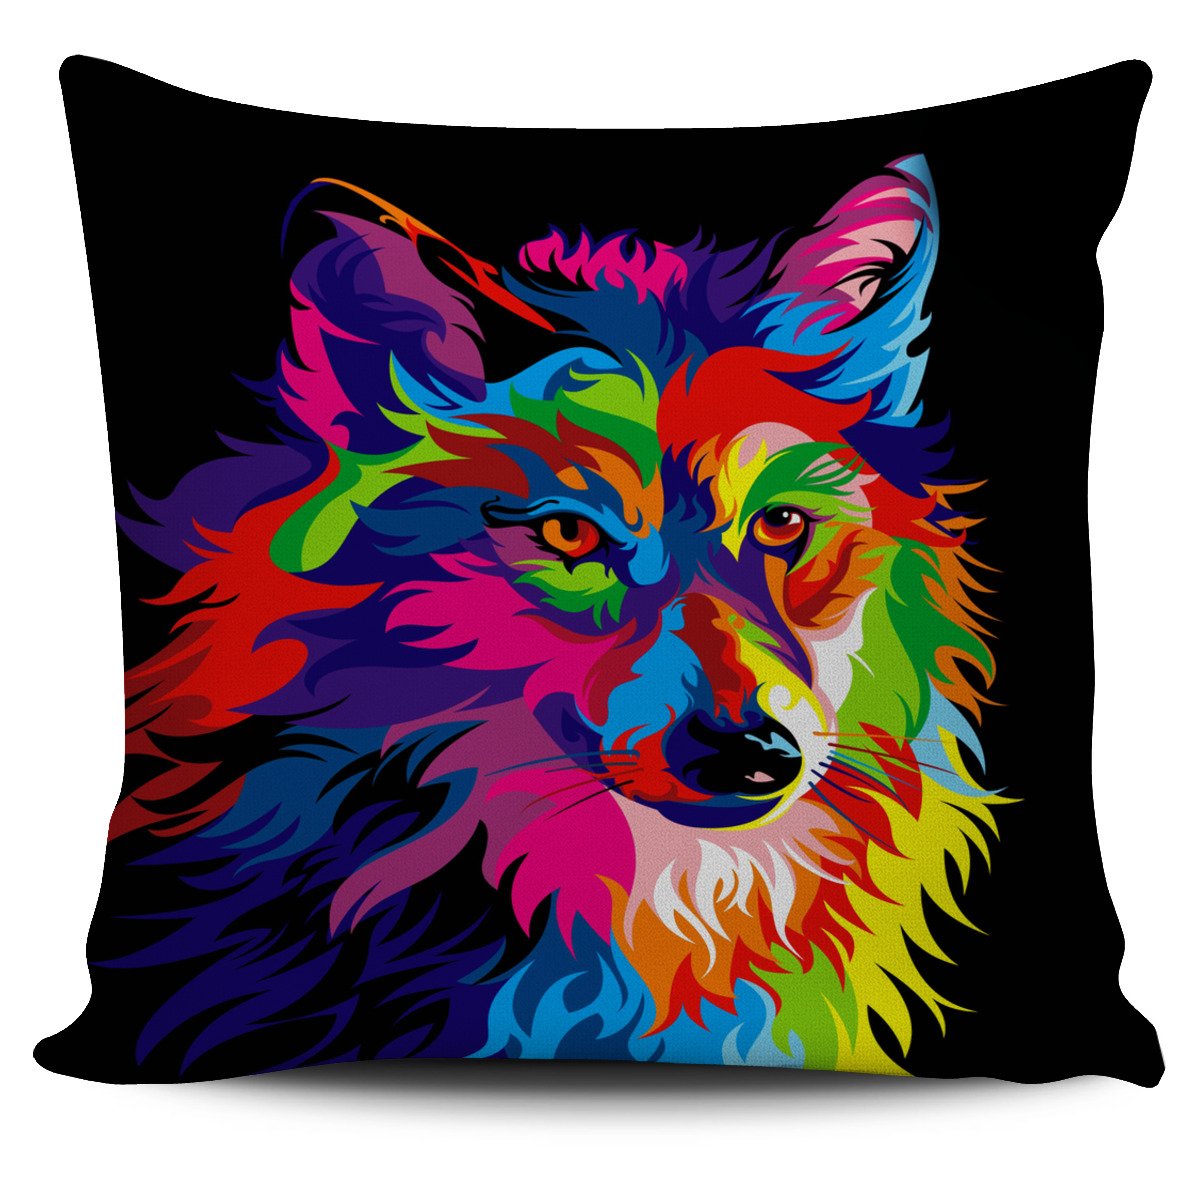 Wolf Pillow Covers